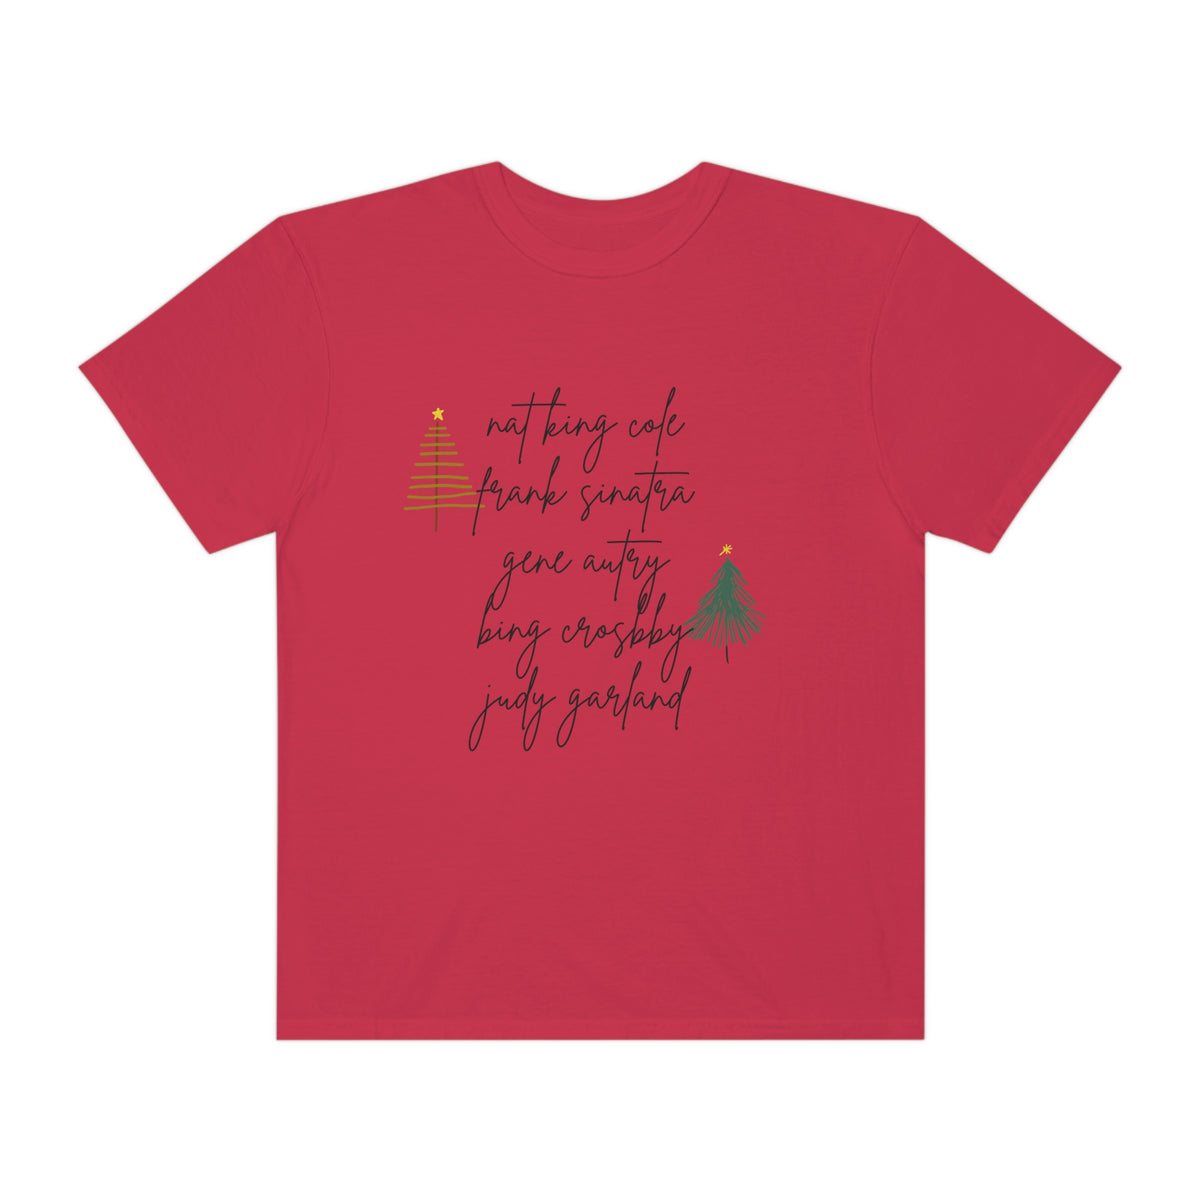 Christmas Tshirt, Christmas Classic Holiday Pullover, Nat King Cole, Frank Sinatra, Judy Garland, Gene Autry Tee, Holiday Gifts